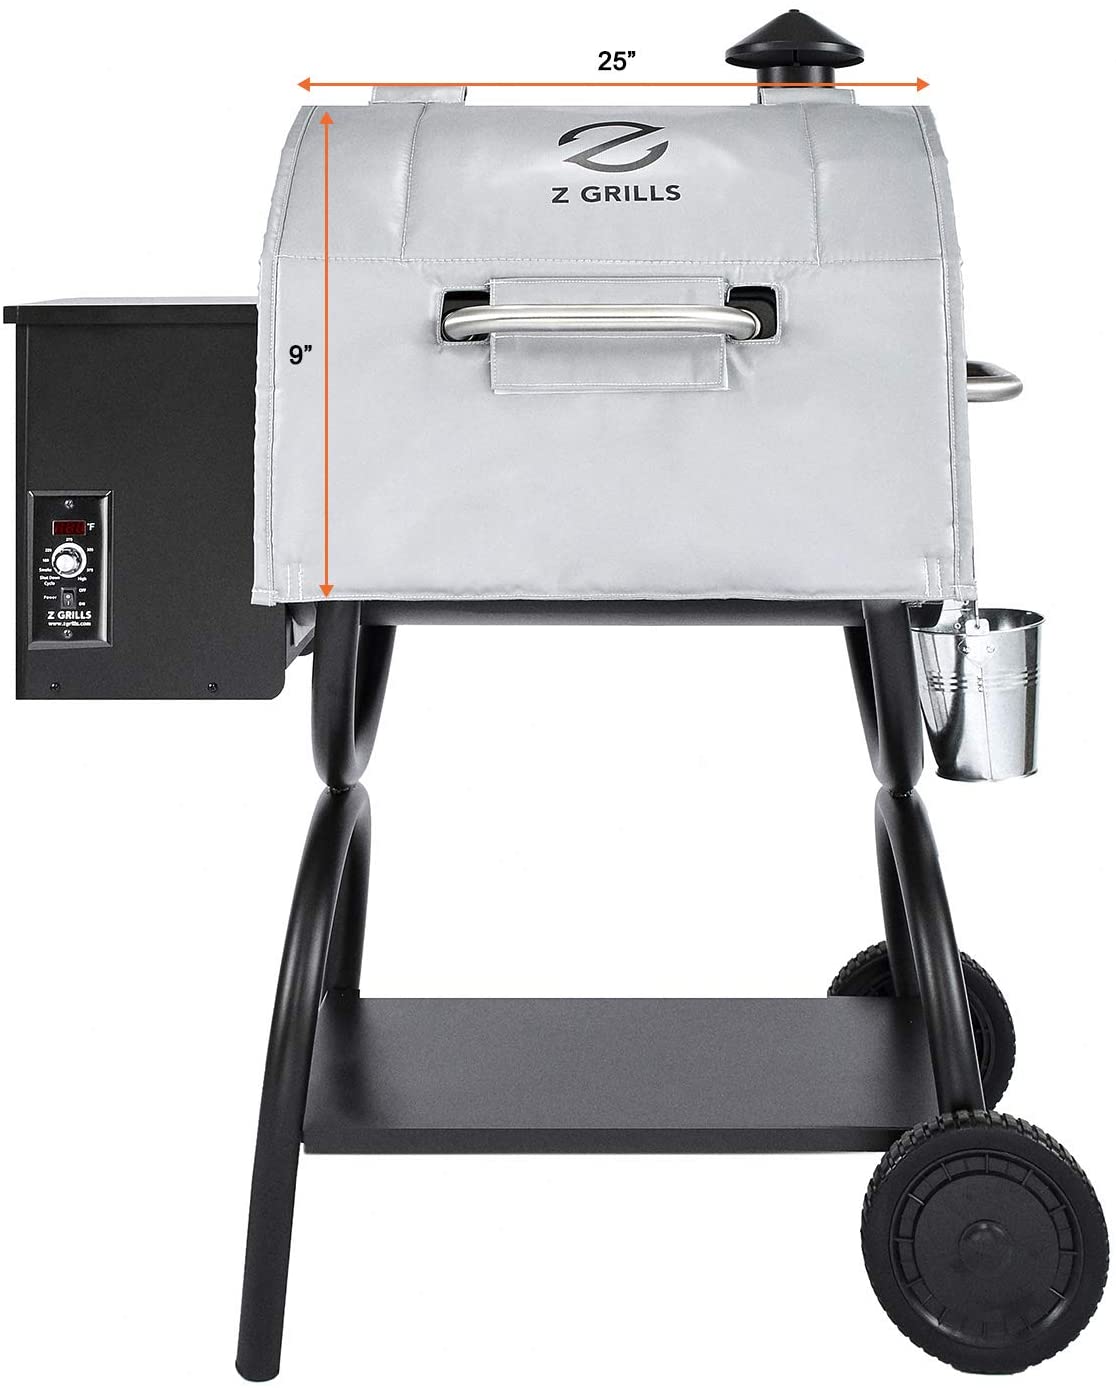 Z GRILLS Thermal Blanket for ZPG 550A -Keep Consistent temperatures & Save Pellet-Enjoy BBQ All Year Round Even Cold Winter - image 2 of 7